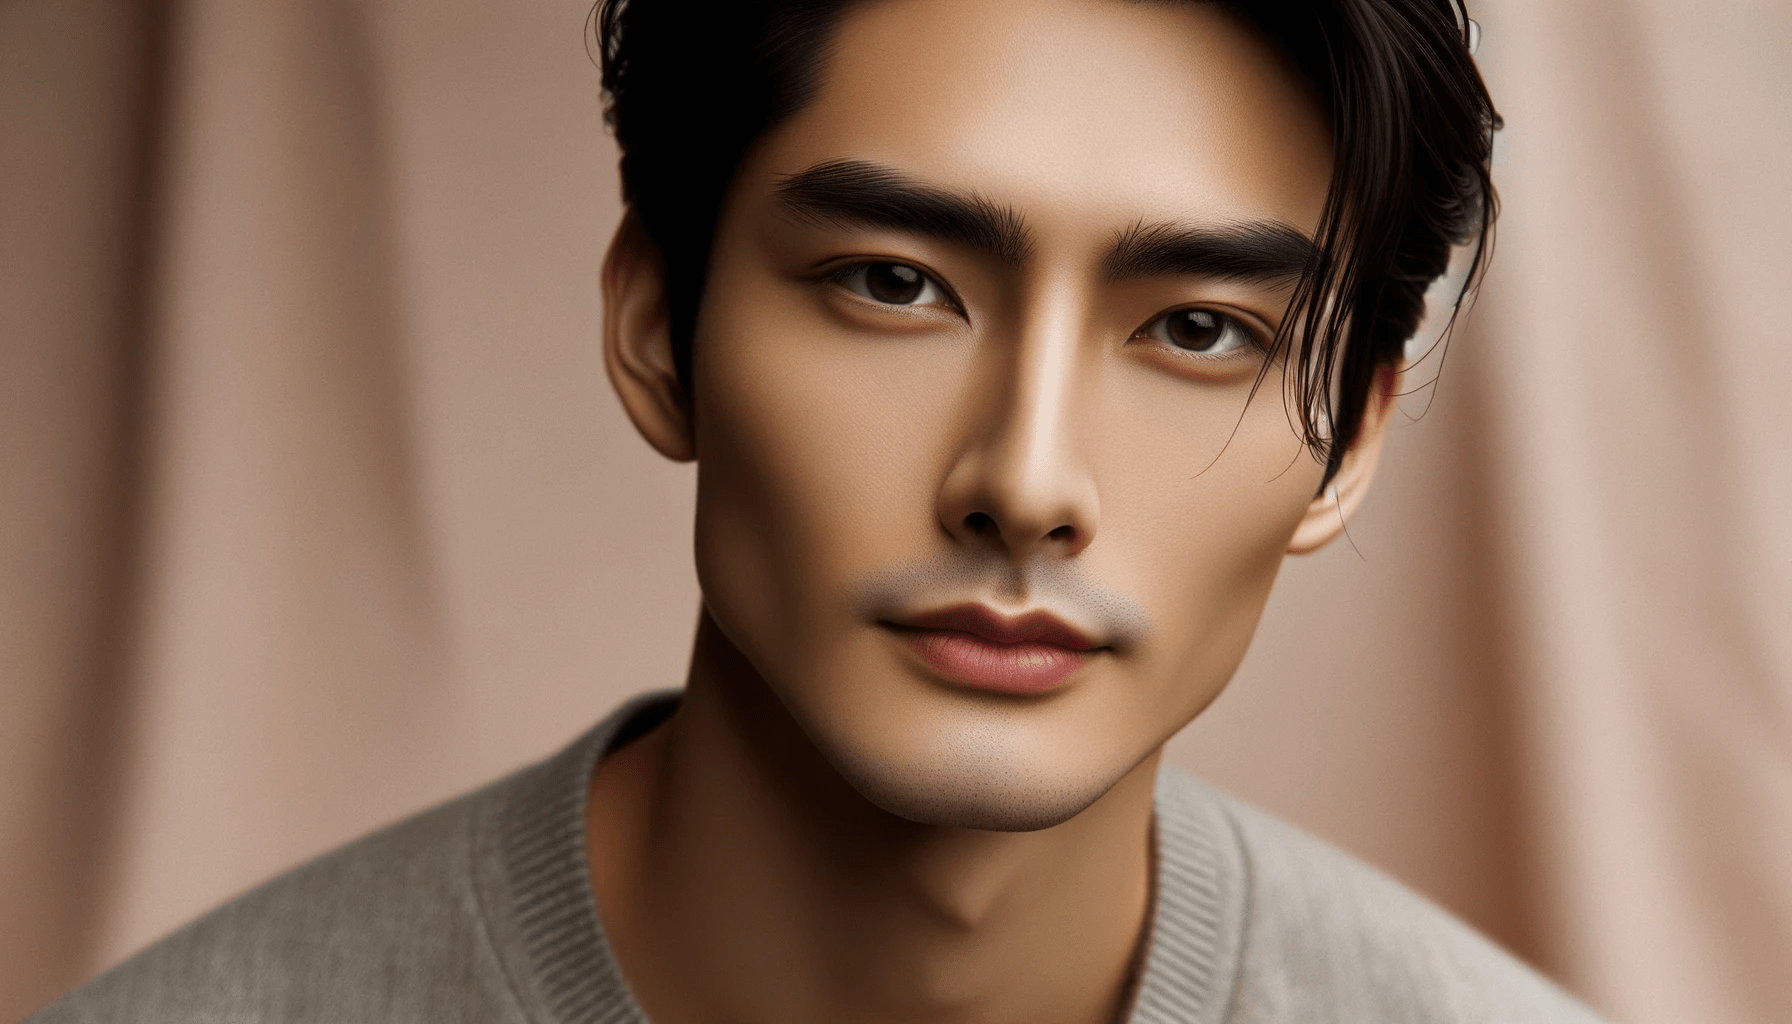 An Asian male with an alluring and handsome face. His slightly arched eyebrows prominent cheekbones and refined nose st